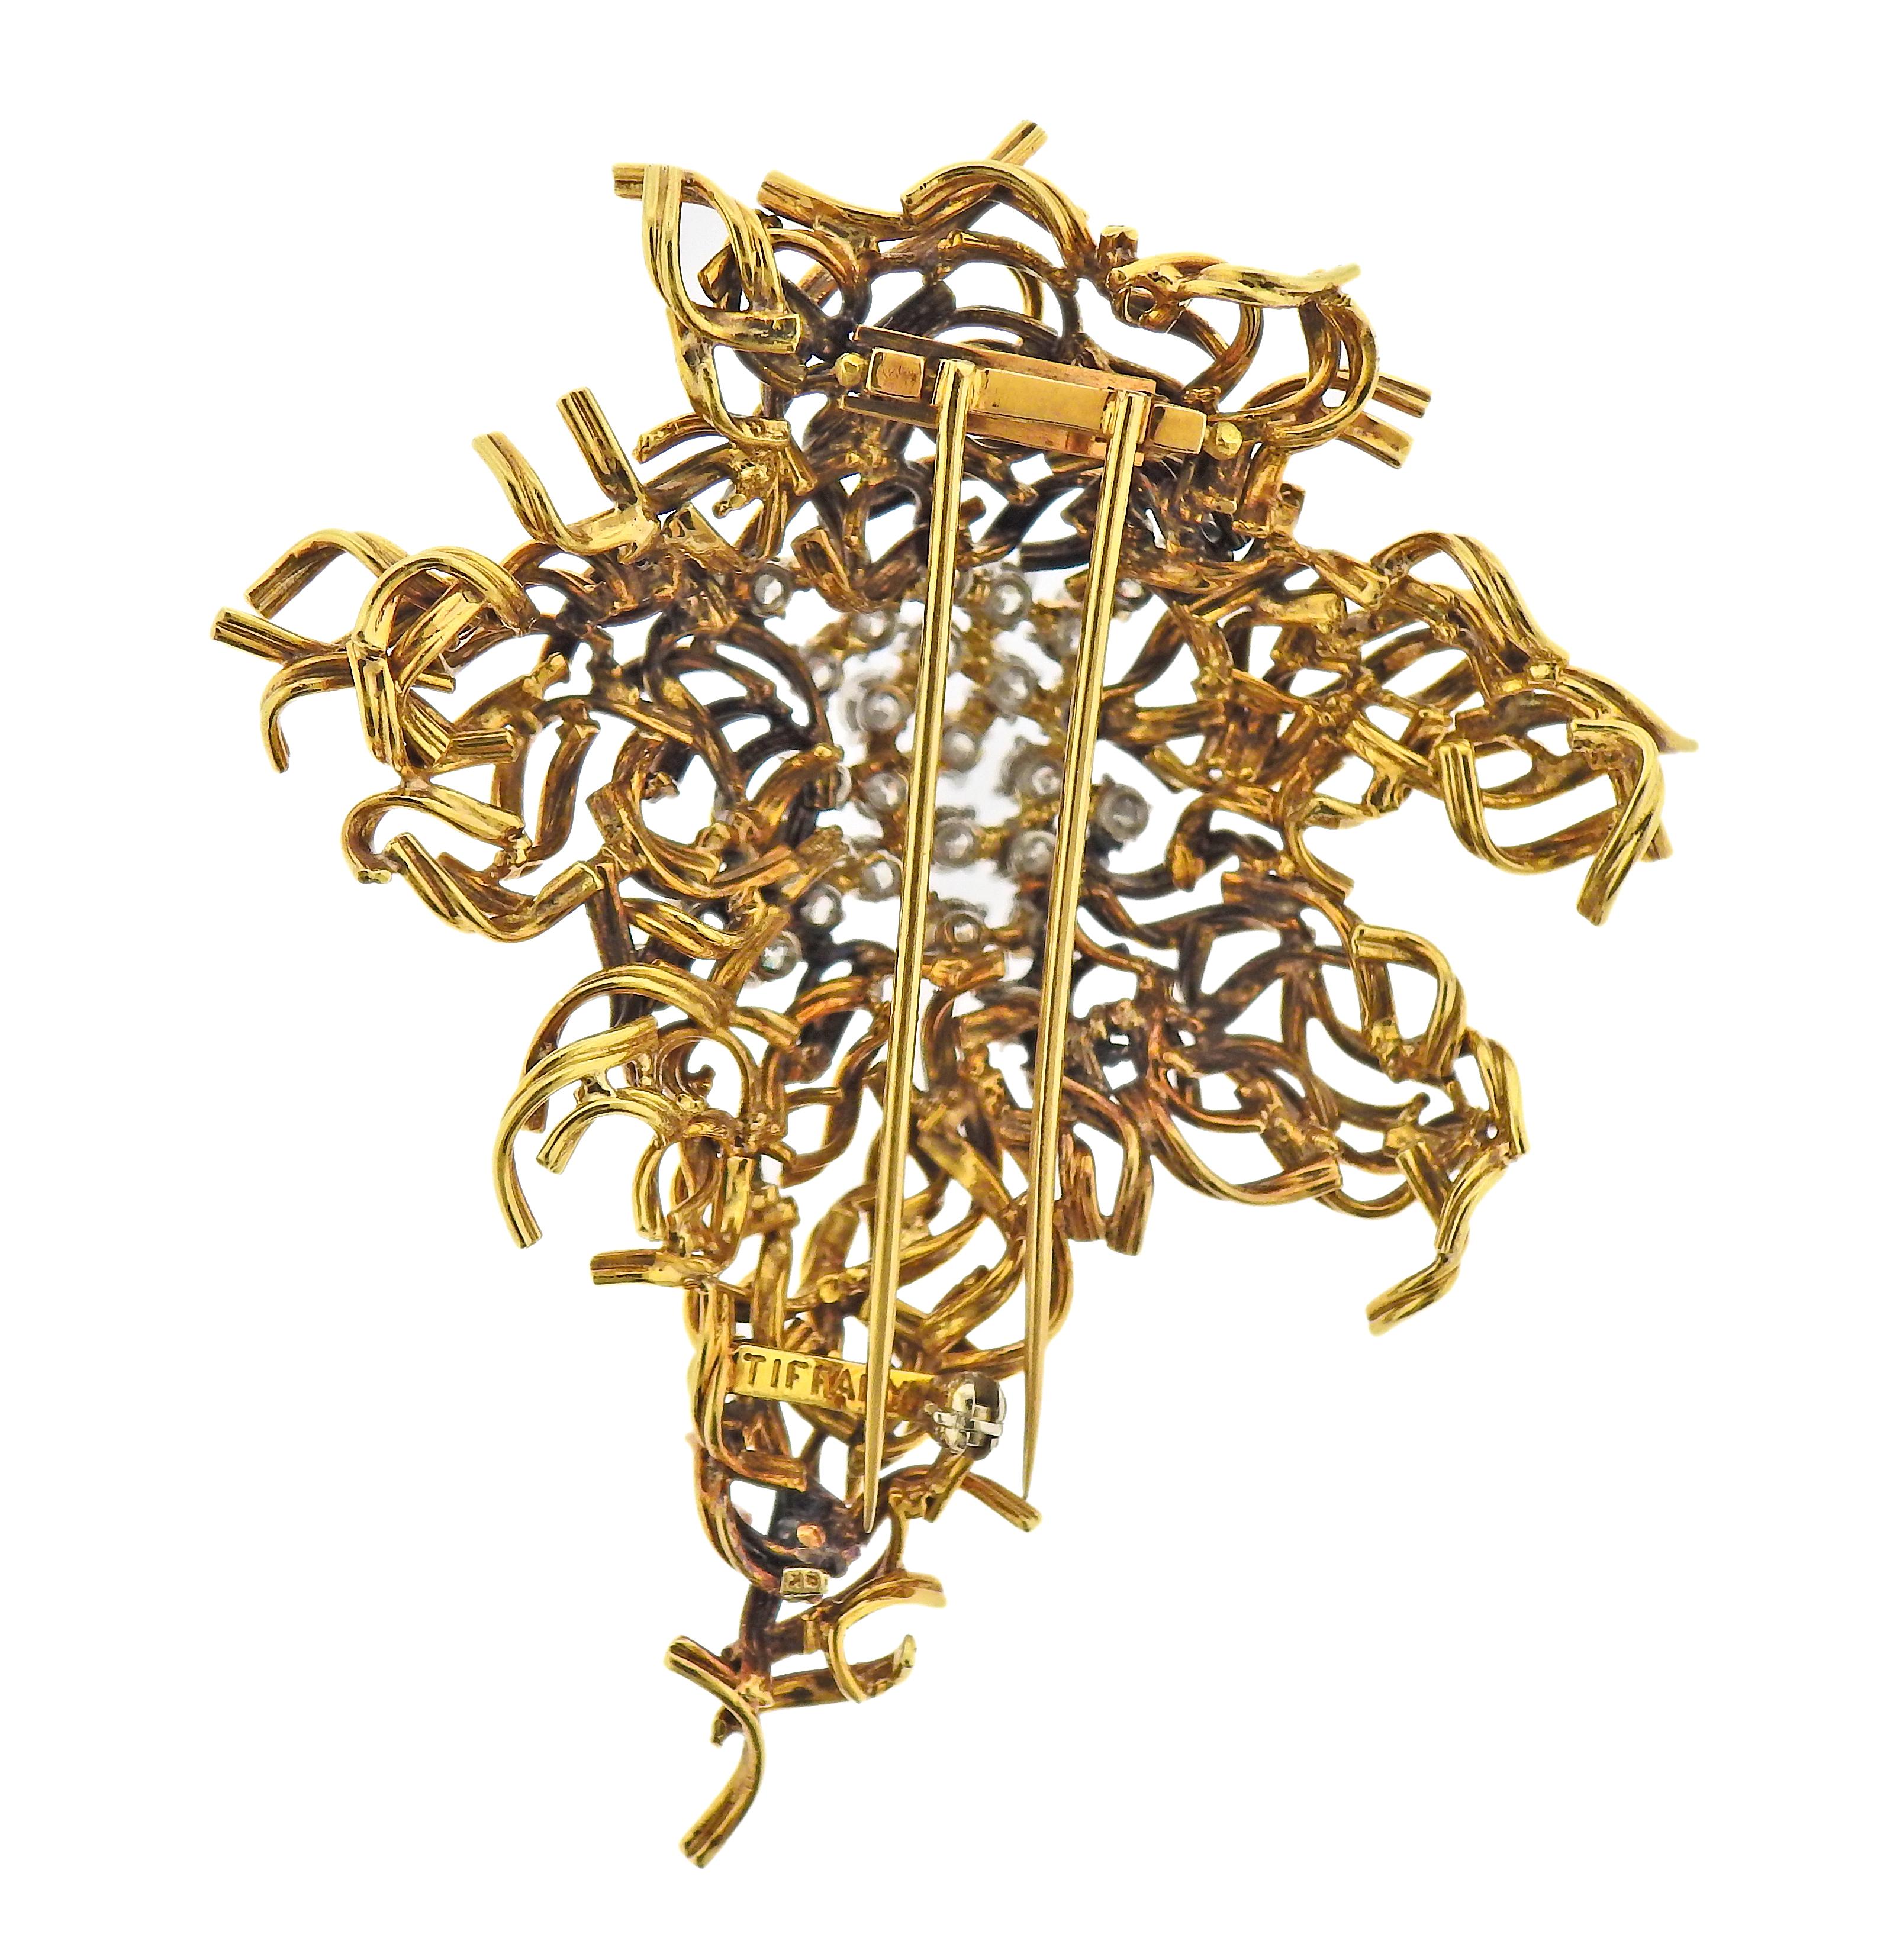 Vintage 18k gold brooch by Tiffany & Co, can be worn as a pendant. Adorned with approx. 2.50ctw in diamonds. Brooch measures 68mm x 58mm. Marked: Tiffany, 18k. Weight - 35.8 grams. 